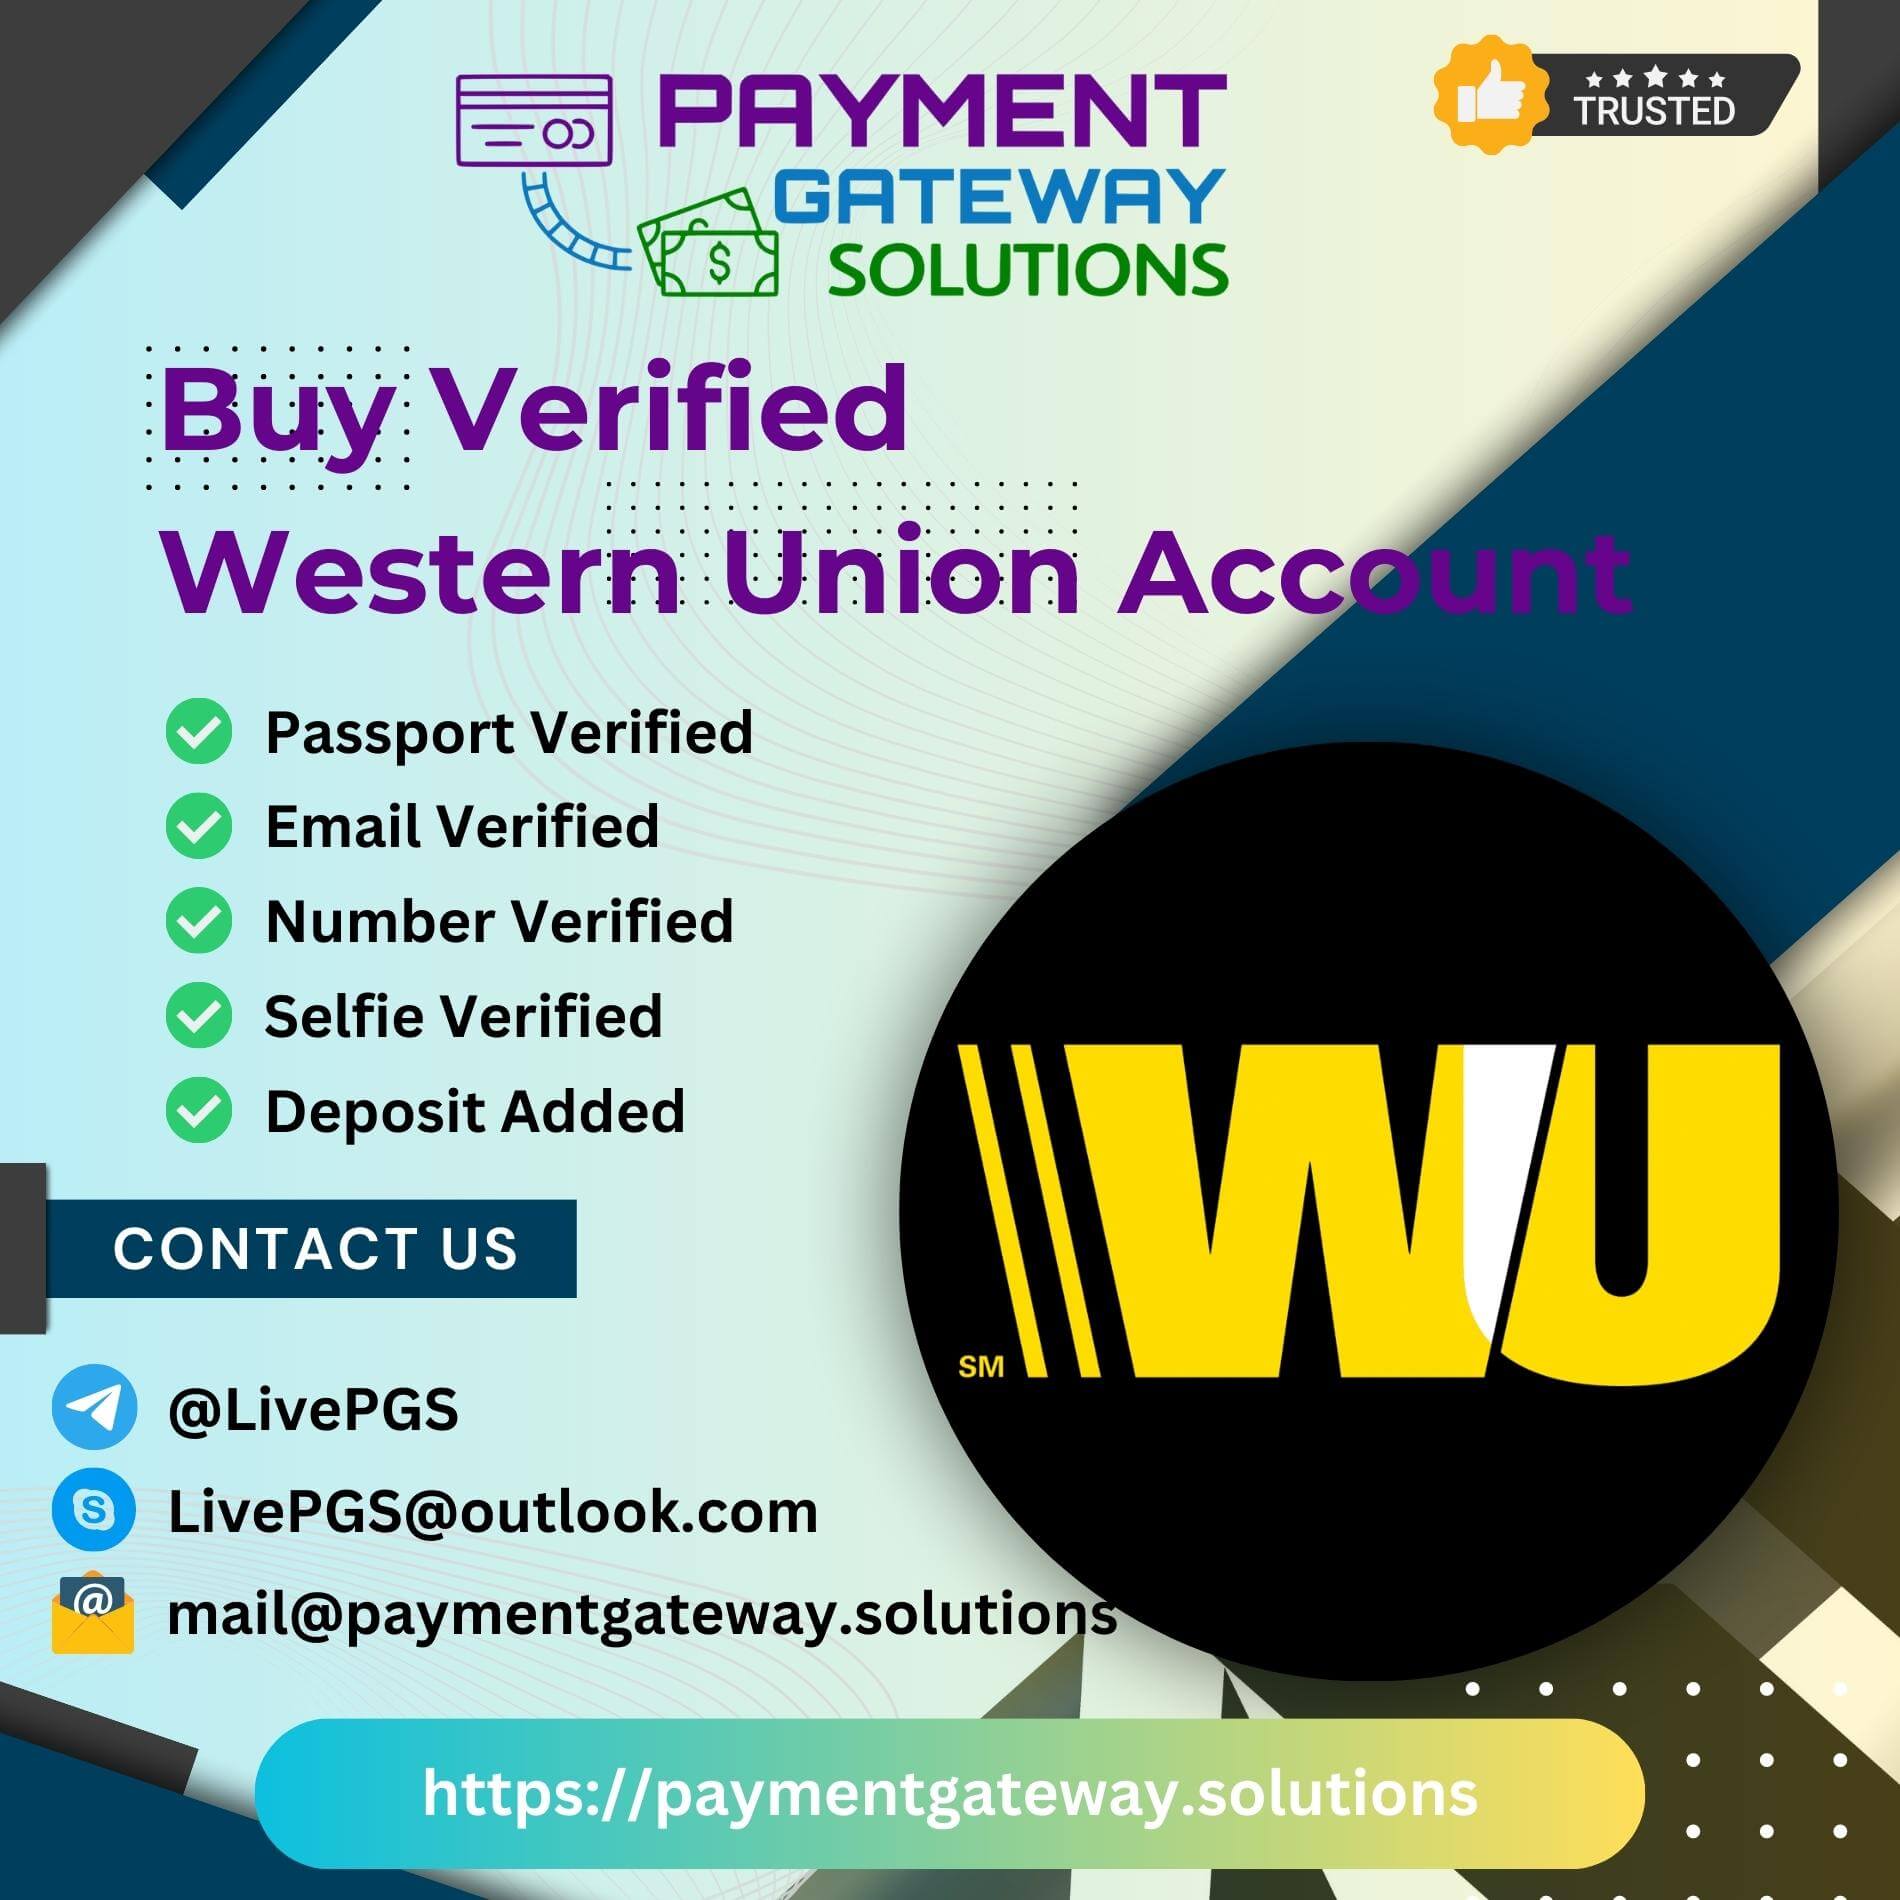 Western Union Announces Agreement to Sell Western Union Business Solutions  to Goldfinch Partners and The Baupost Group for Approximately $910 Million  in Cash